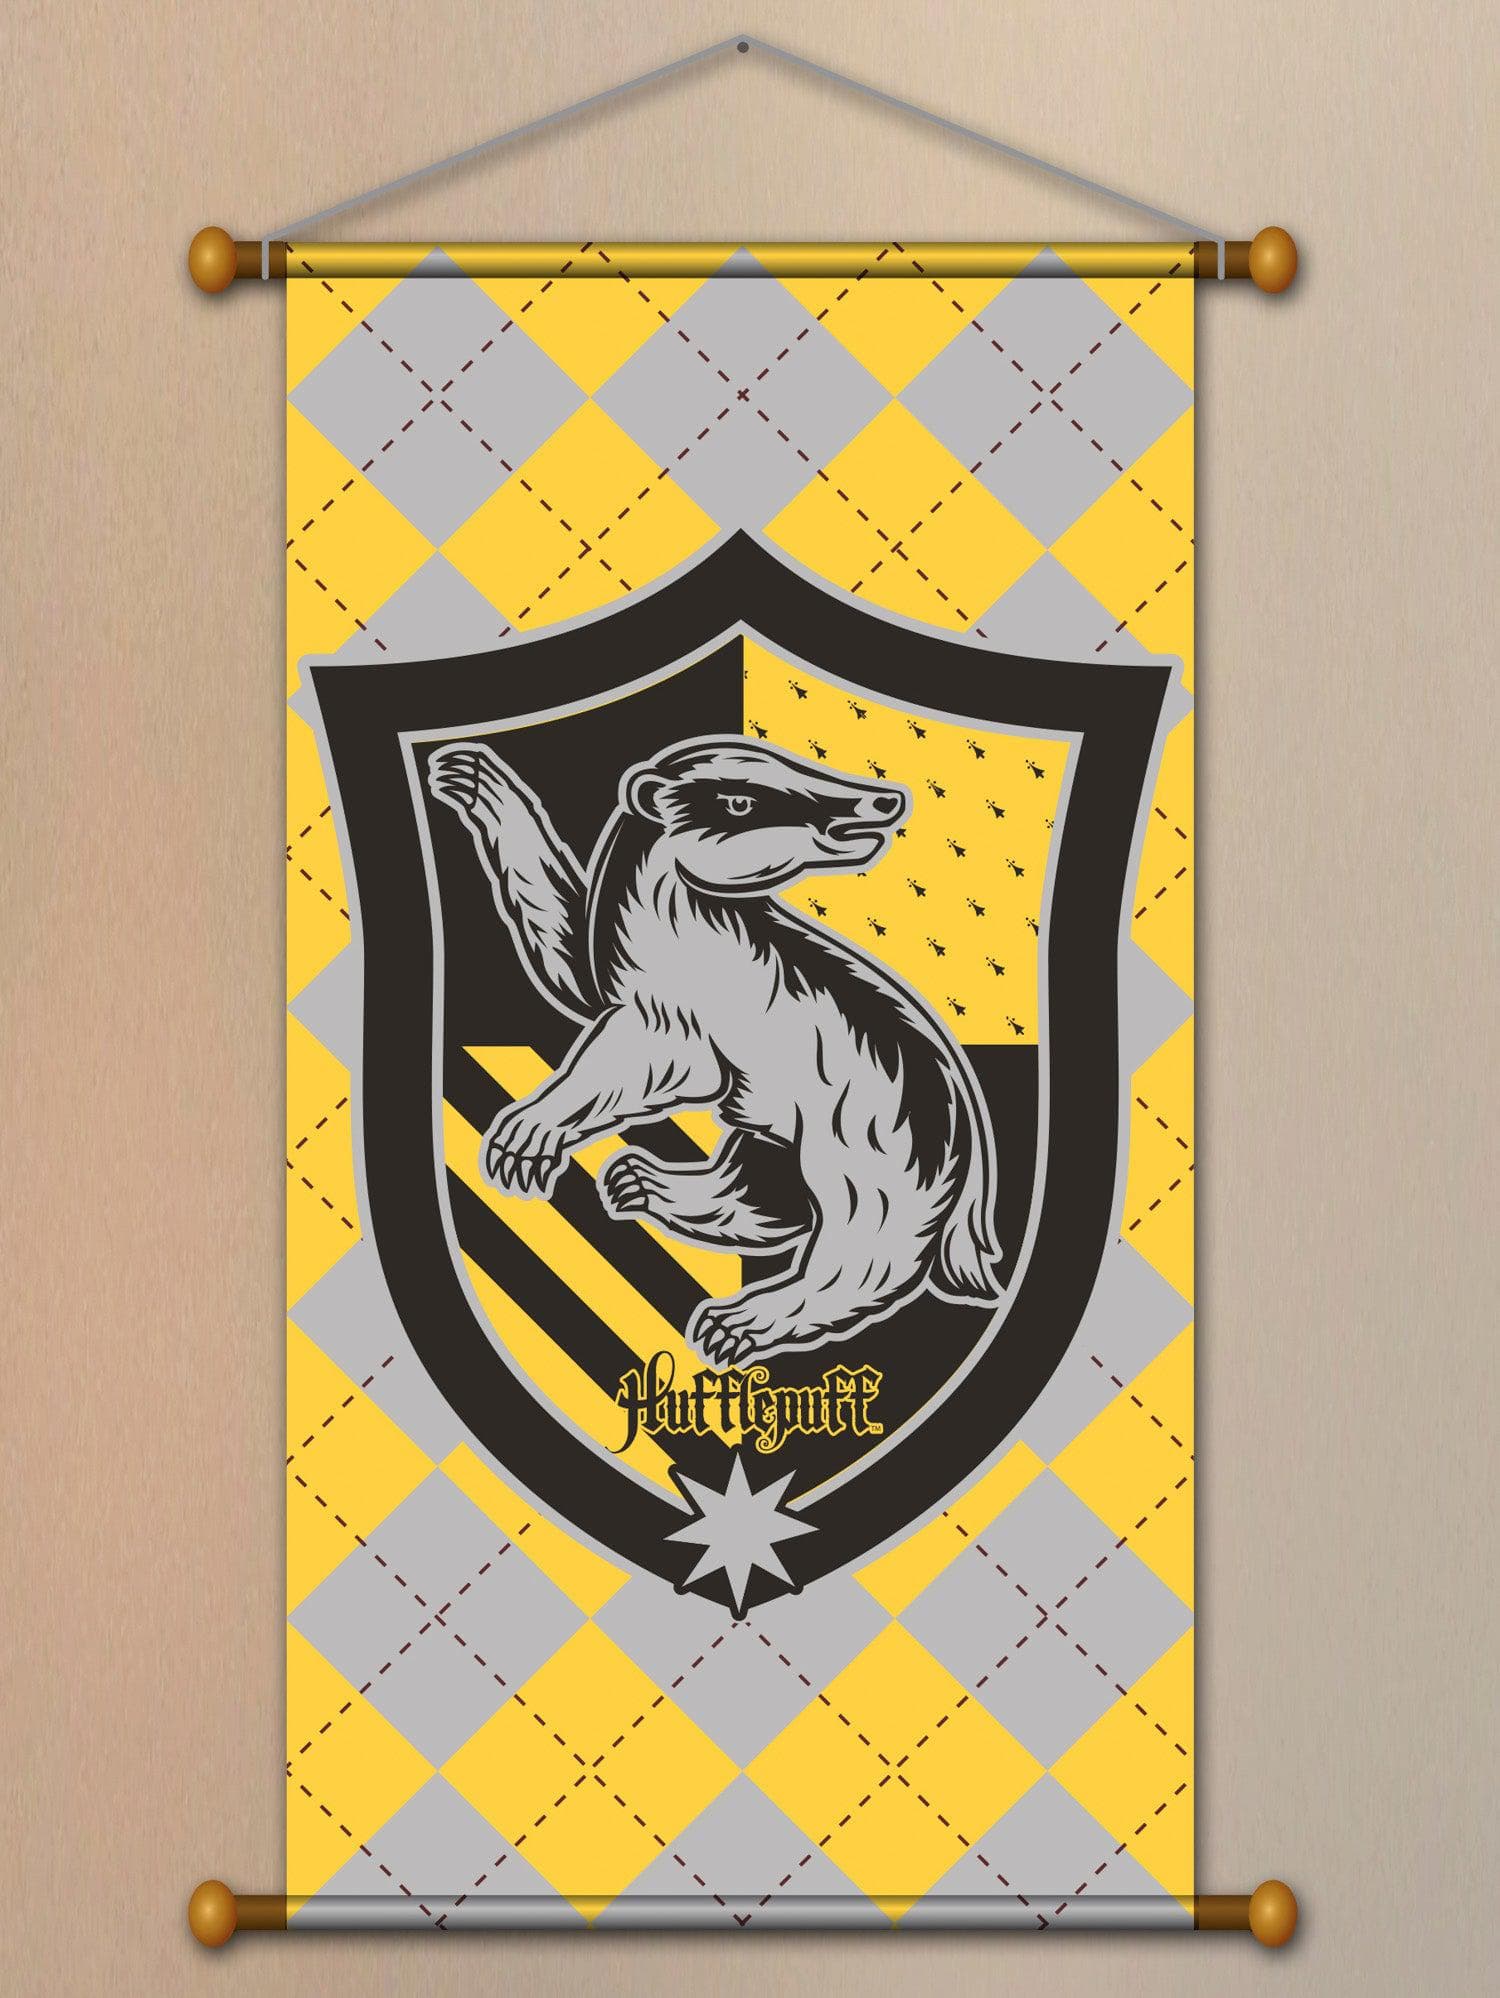 33-inch Harry Potter Hufflepuff House Banner - costumes.com